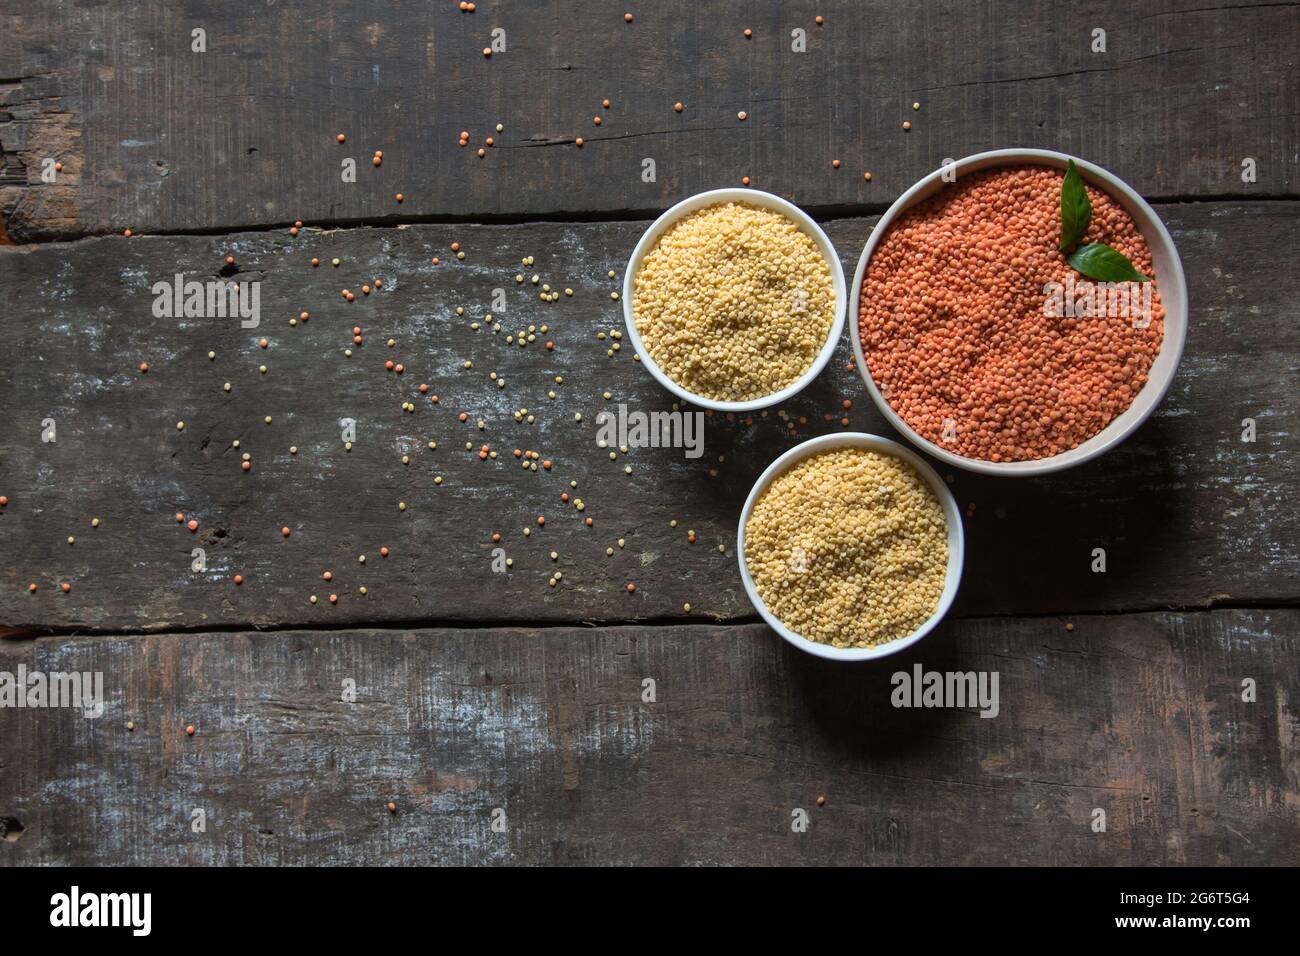 View from top of red and yellow lentils food background. Moong and masoor dal also known as yellow and red lentils respectively. Stock Photo